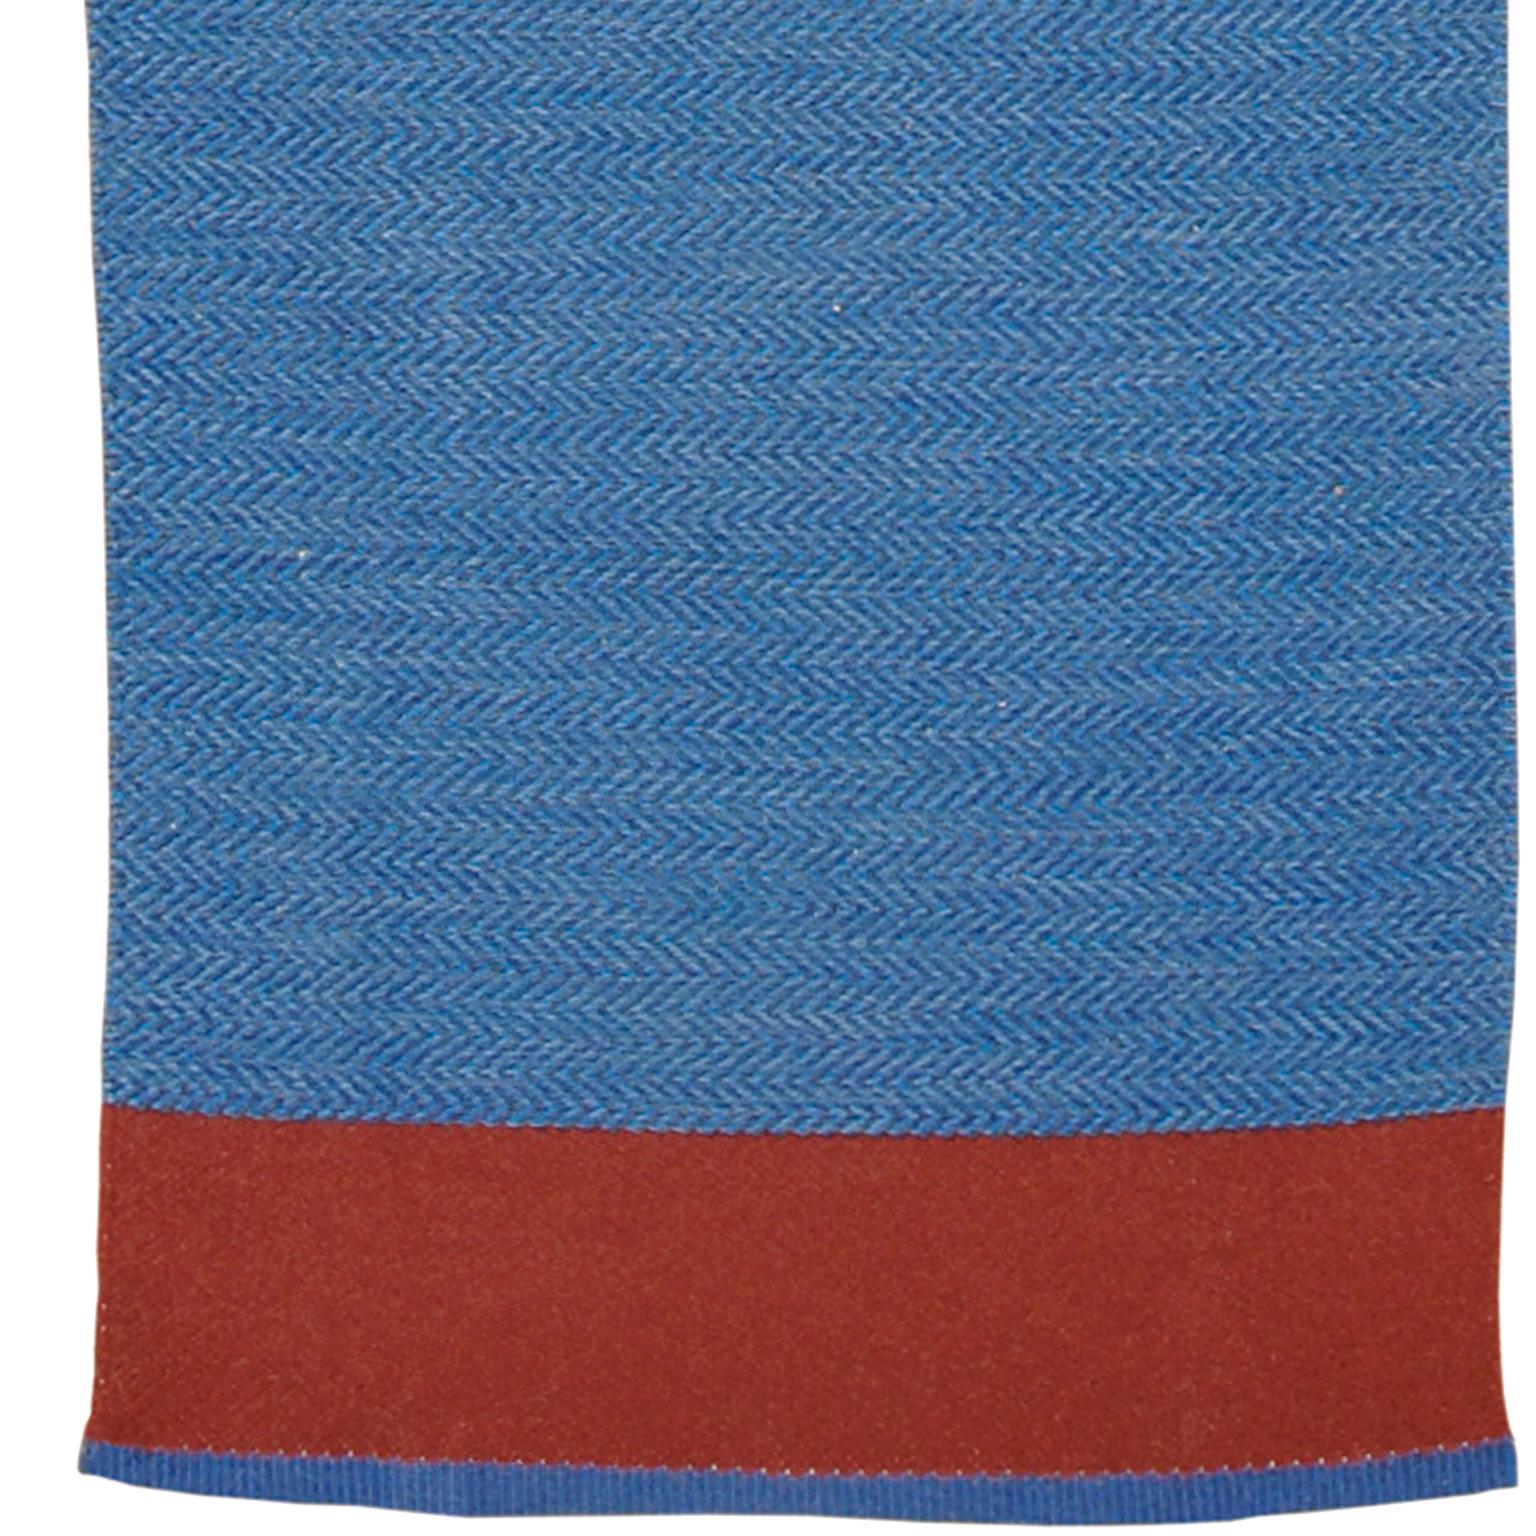 Swedish flat-weave rug
Sweden circa 1950
Handwoven
Zigzag pattern in blue and grey with small red-brown fields.